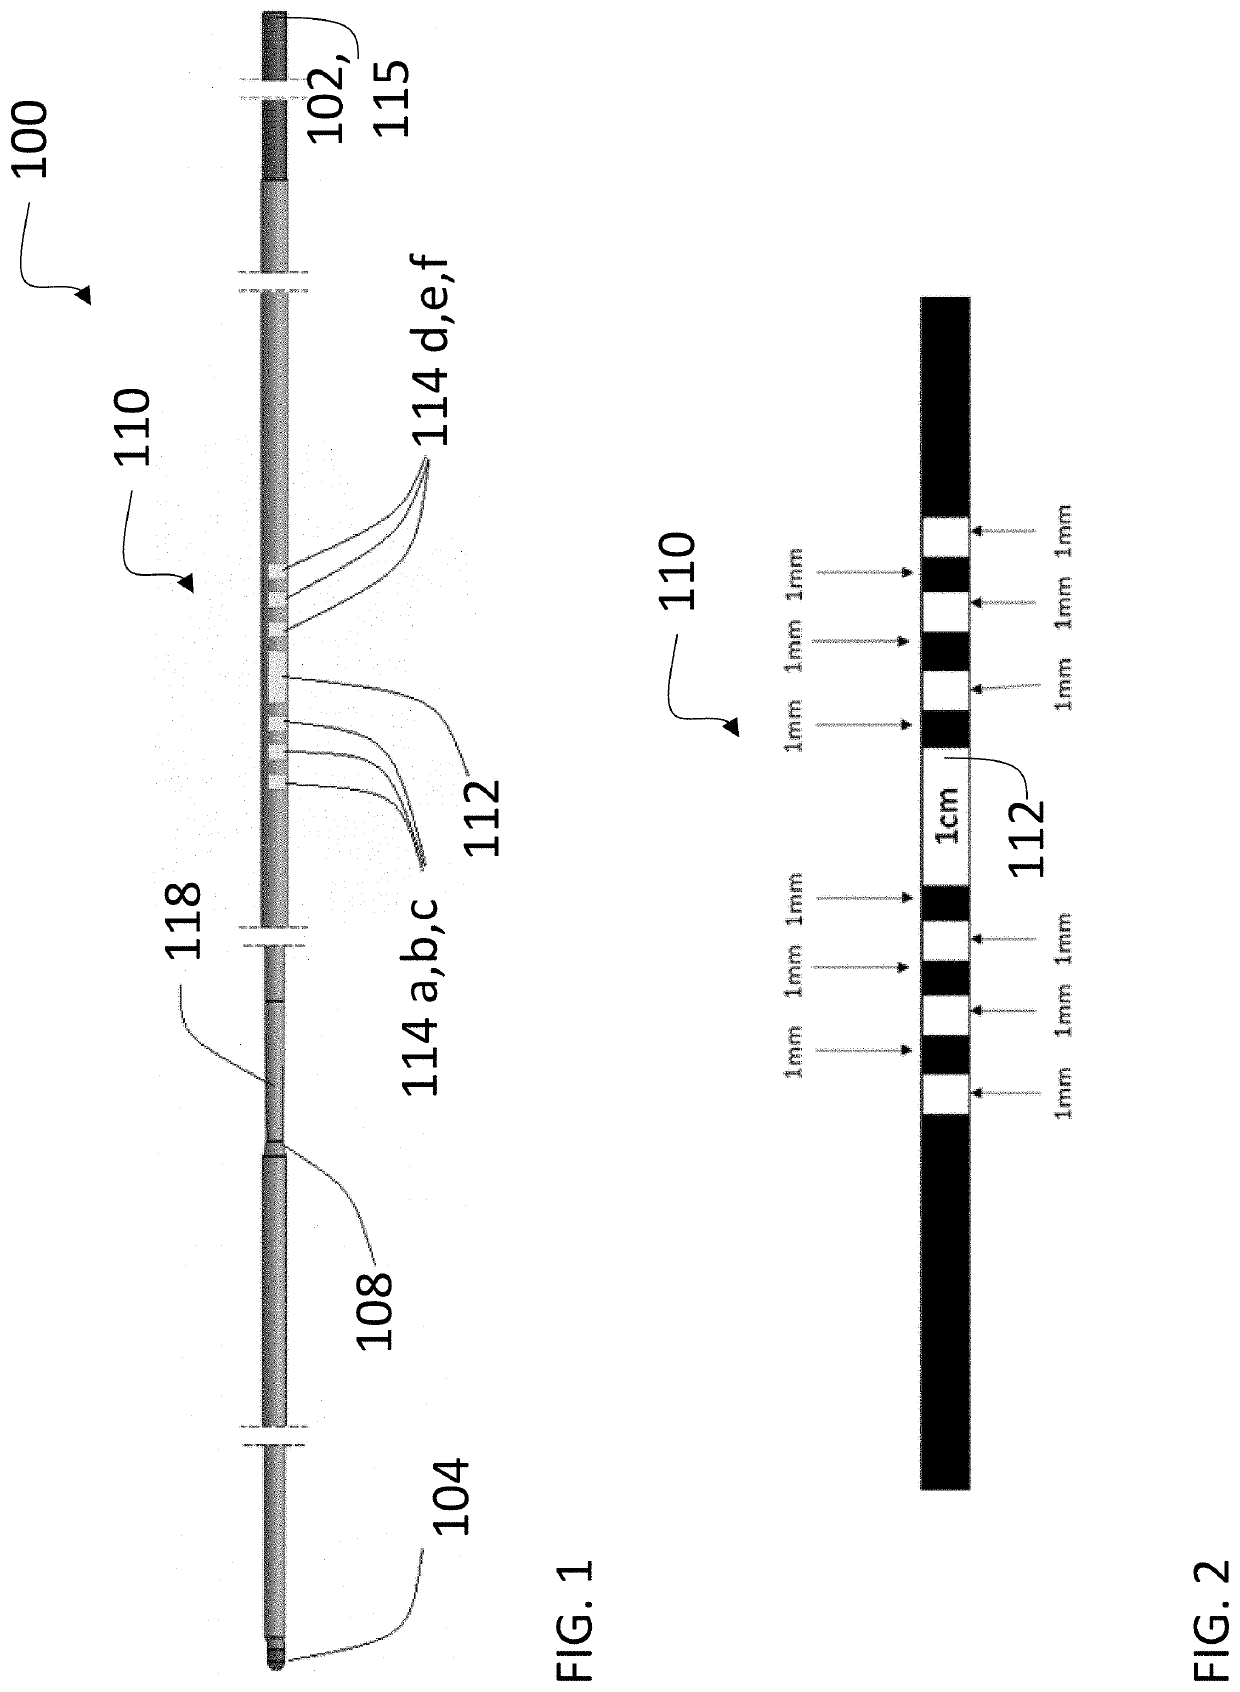 Tissue excision, cutting, and removal systems and methods